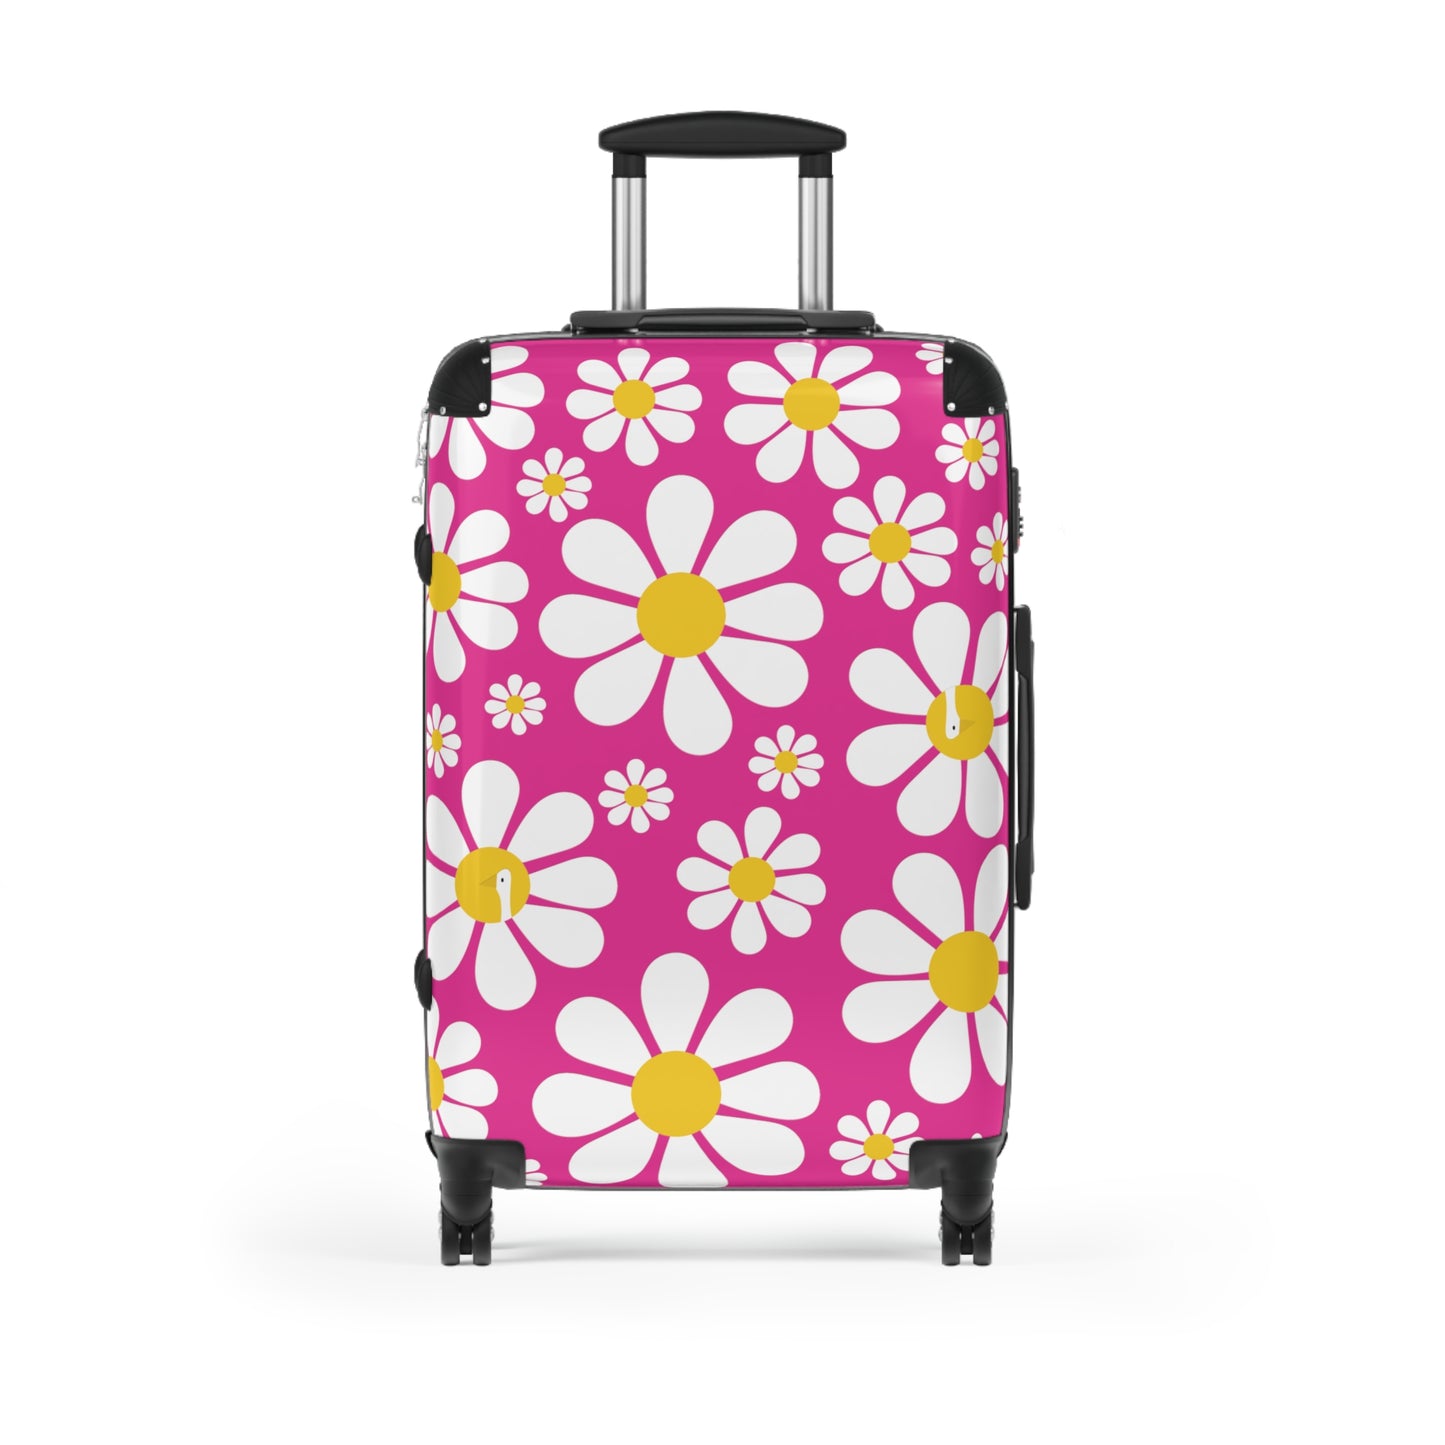 Ducks in Daisies - Large print - Mean Girls Lipstick ff00a8 - Suitcase